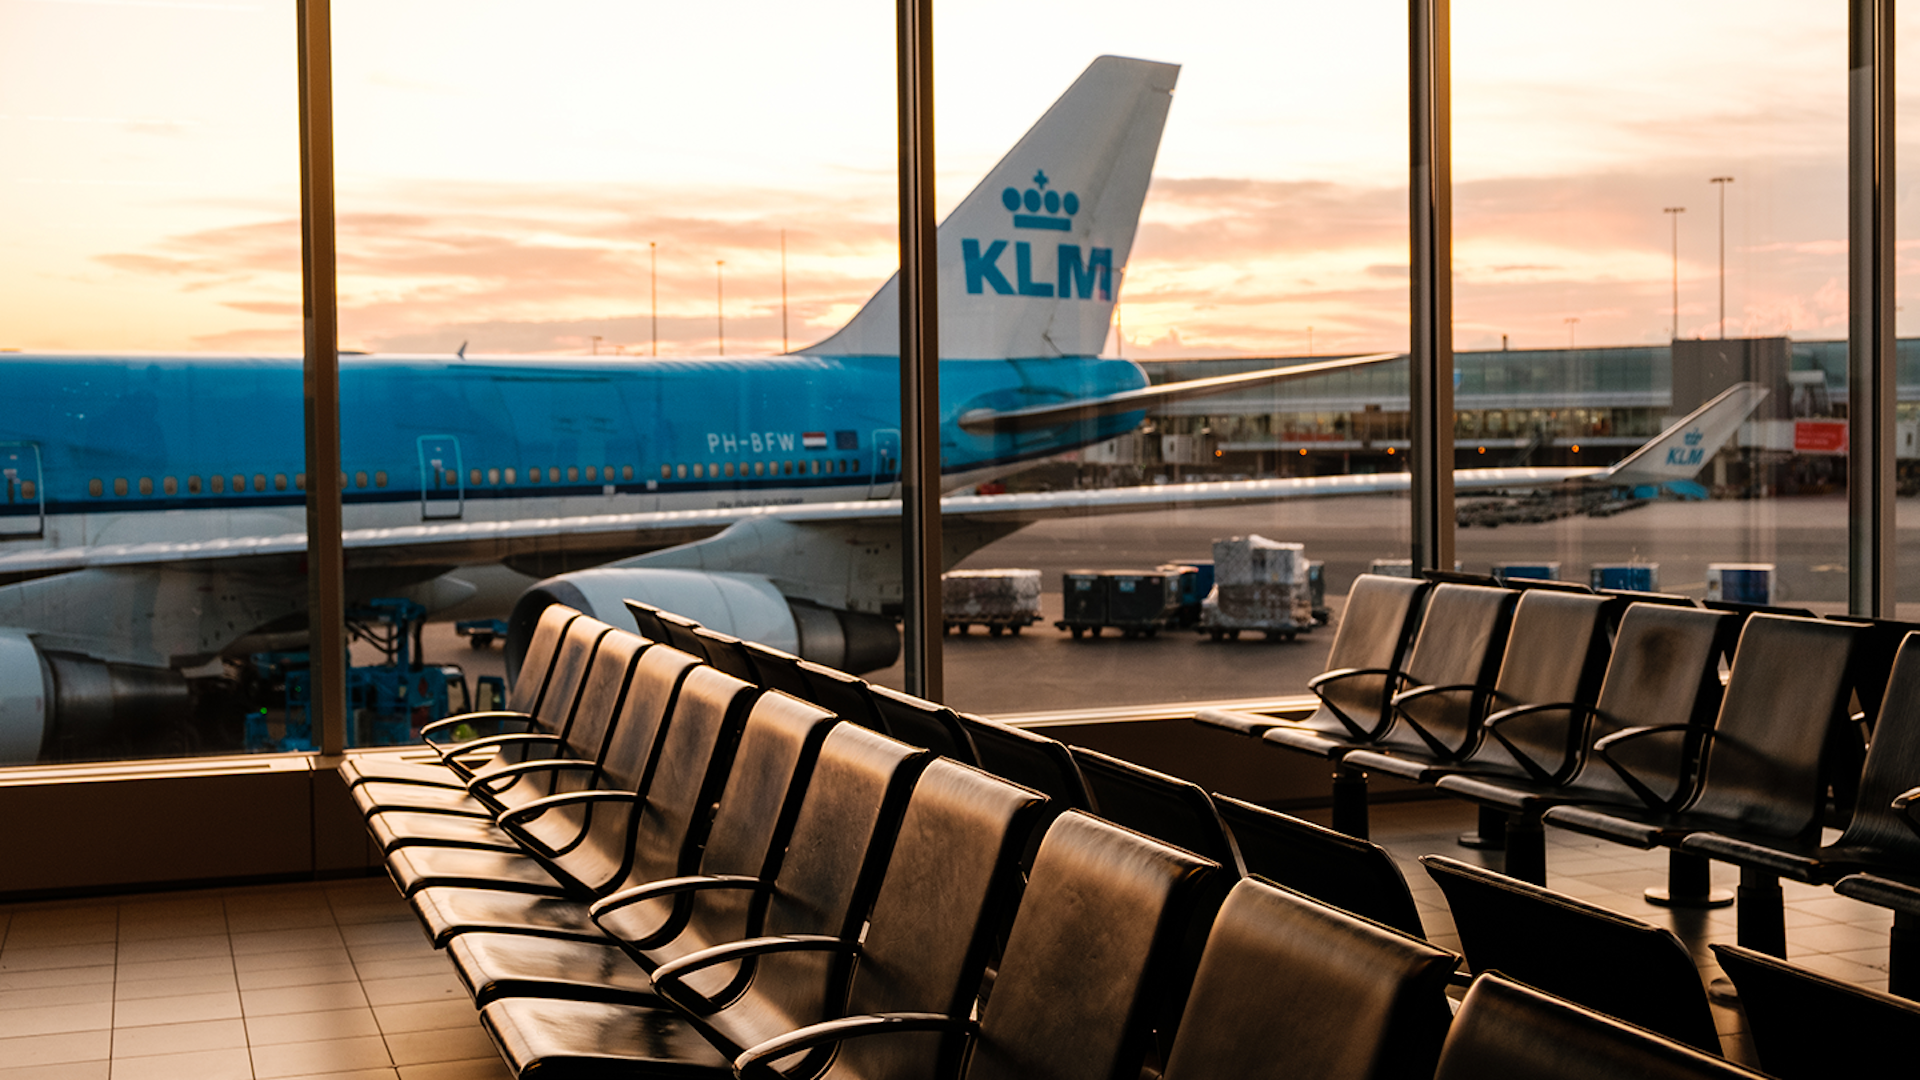 Photo of seats at an airport with a KLM plane in the background